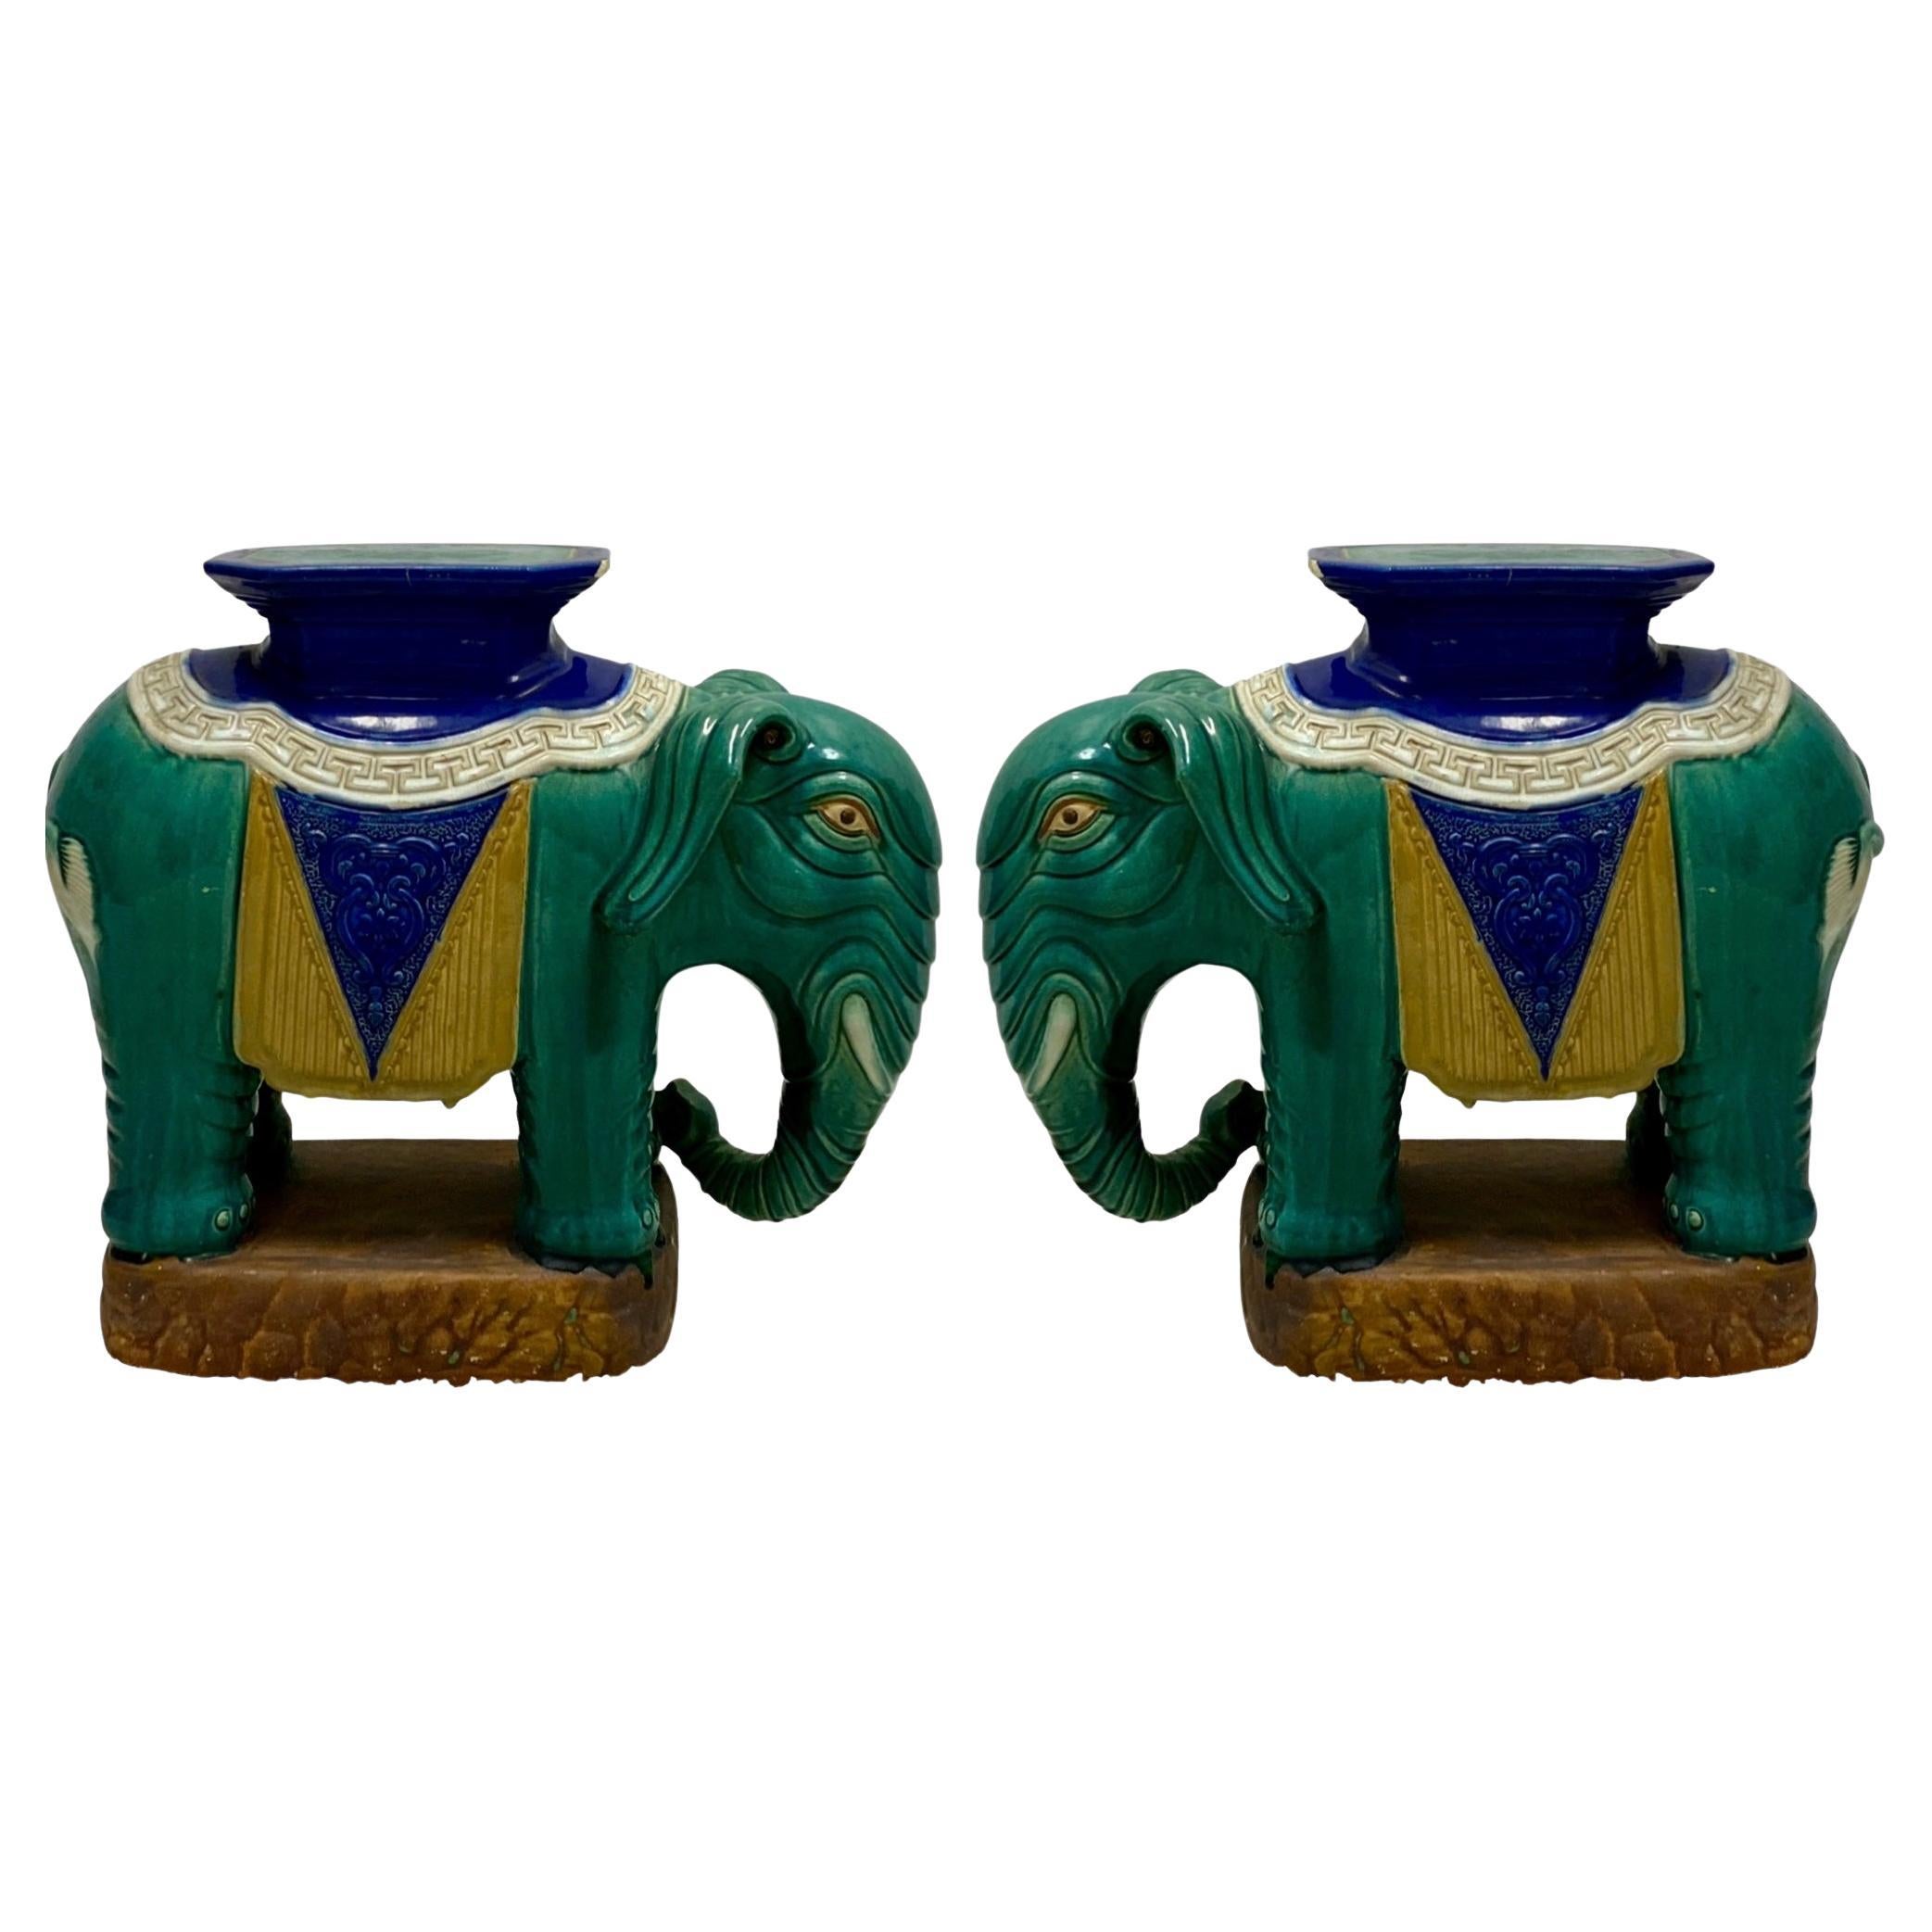 This is a pair of mid-century Chinese Export style elephant form garden seats or side tables. They have a vibrant majolica glaze in blue, green and gold and are ceramic/ pottery. They are in very good condition with age appropriate wear.